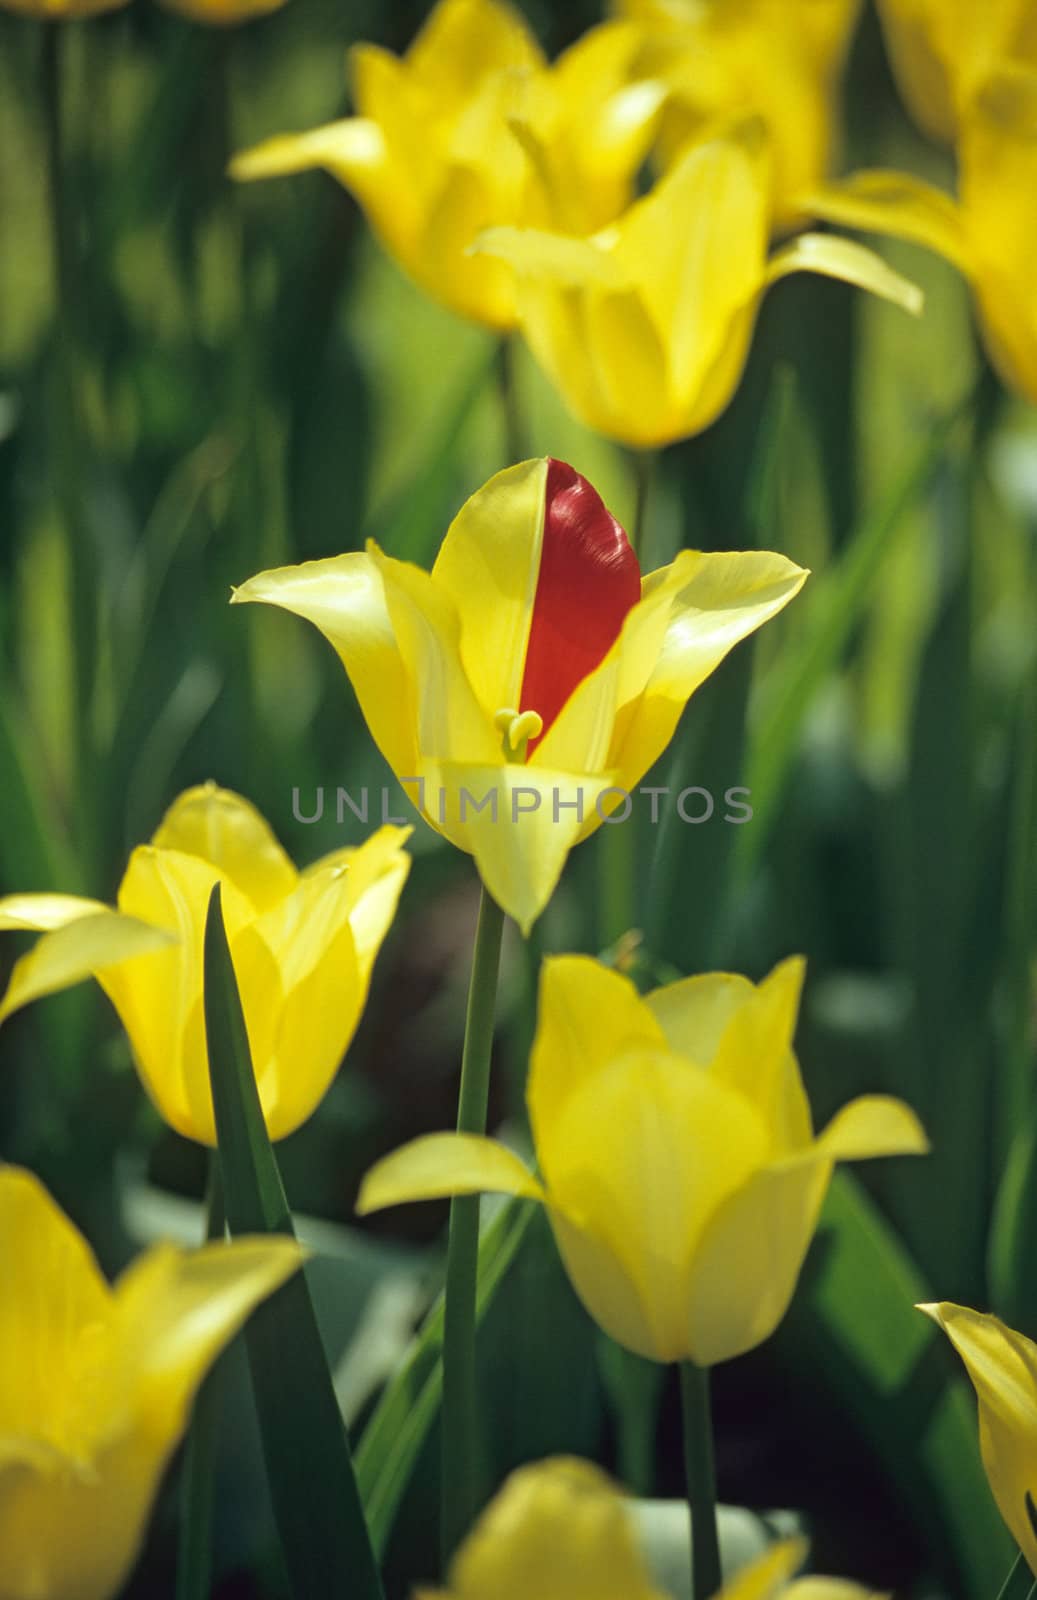 A yellow tulip with one red petal.